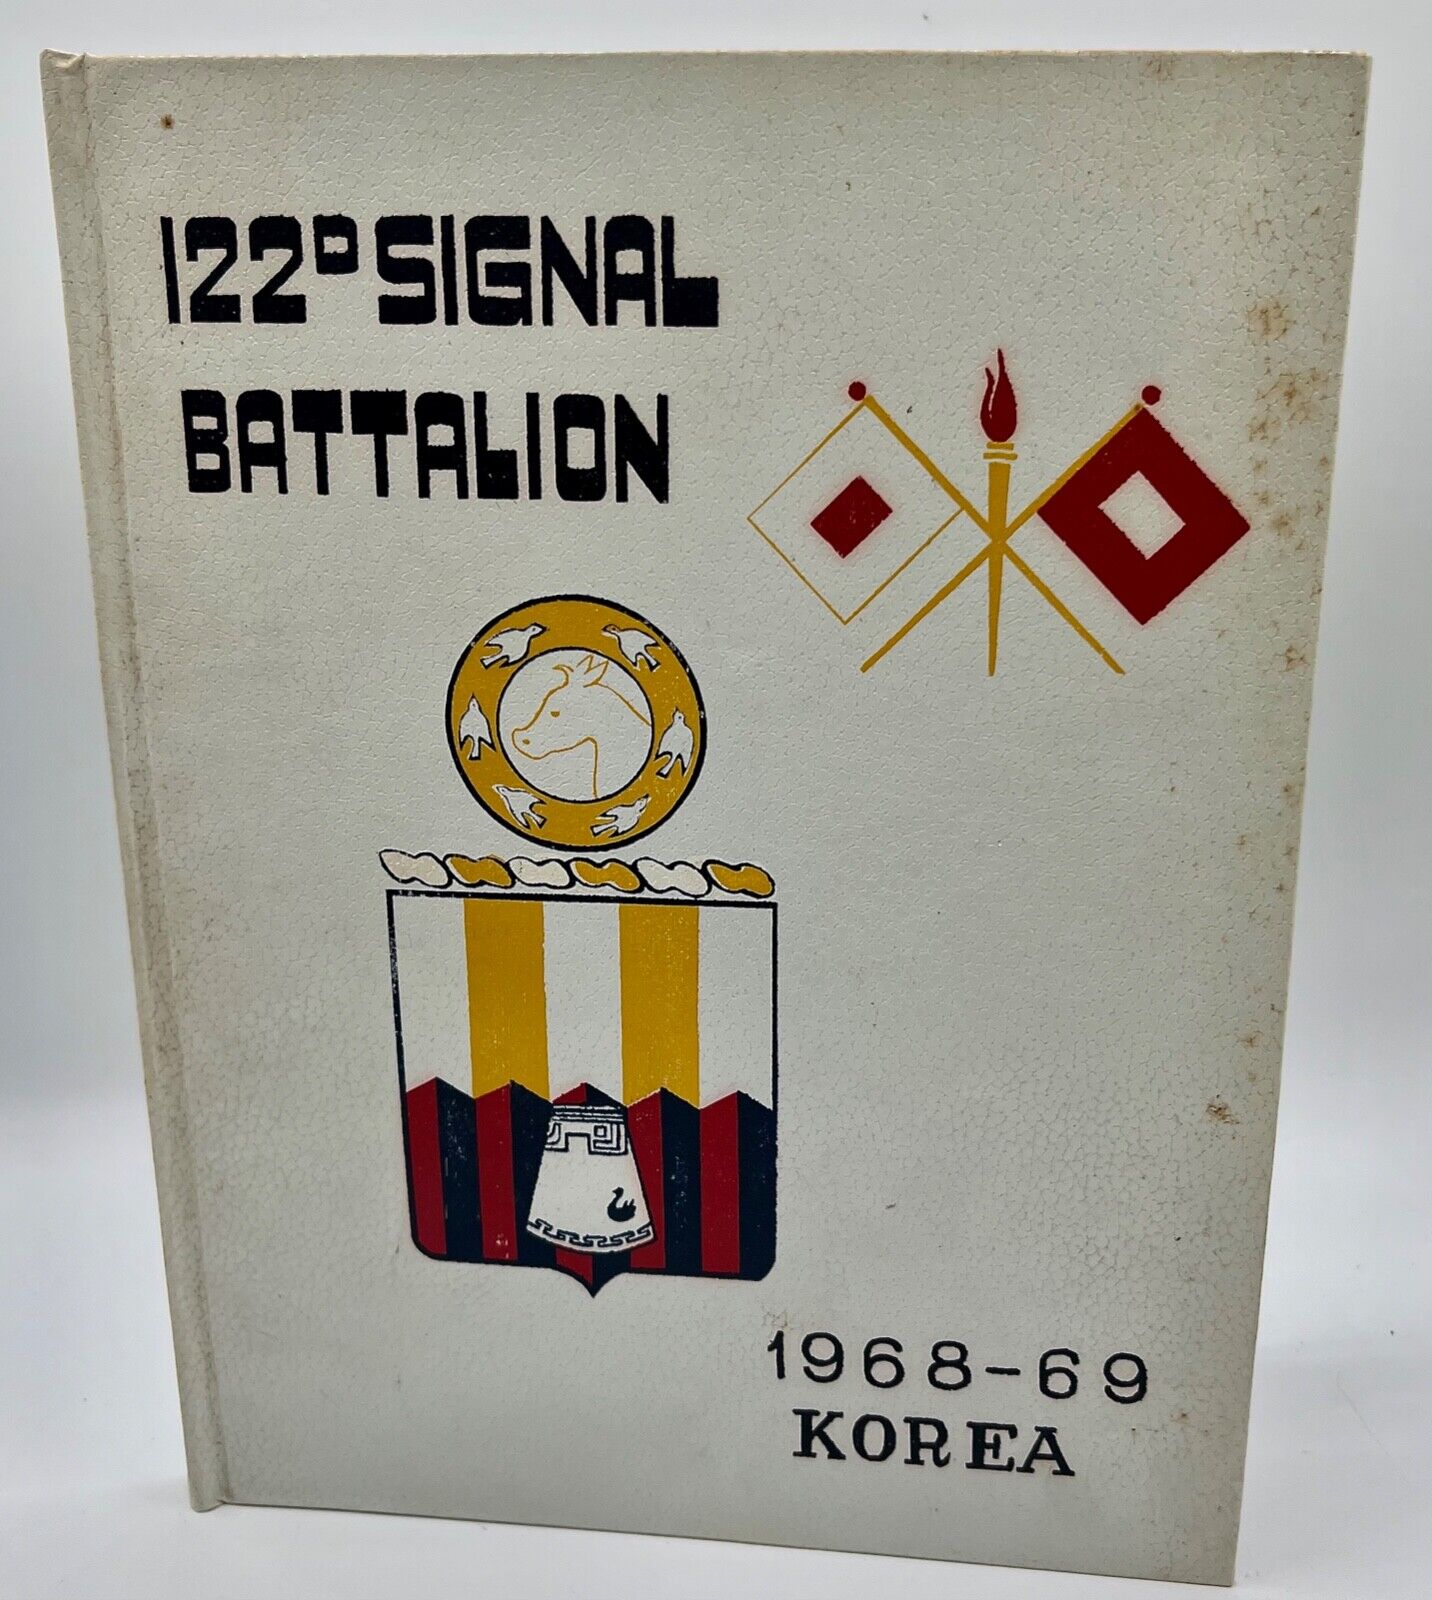 1968-1969 Second Infantry Division Korea 122nd Signal Battalion Yearbook US Army